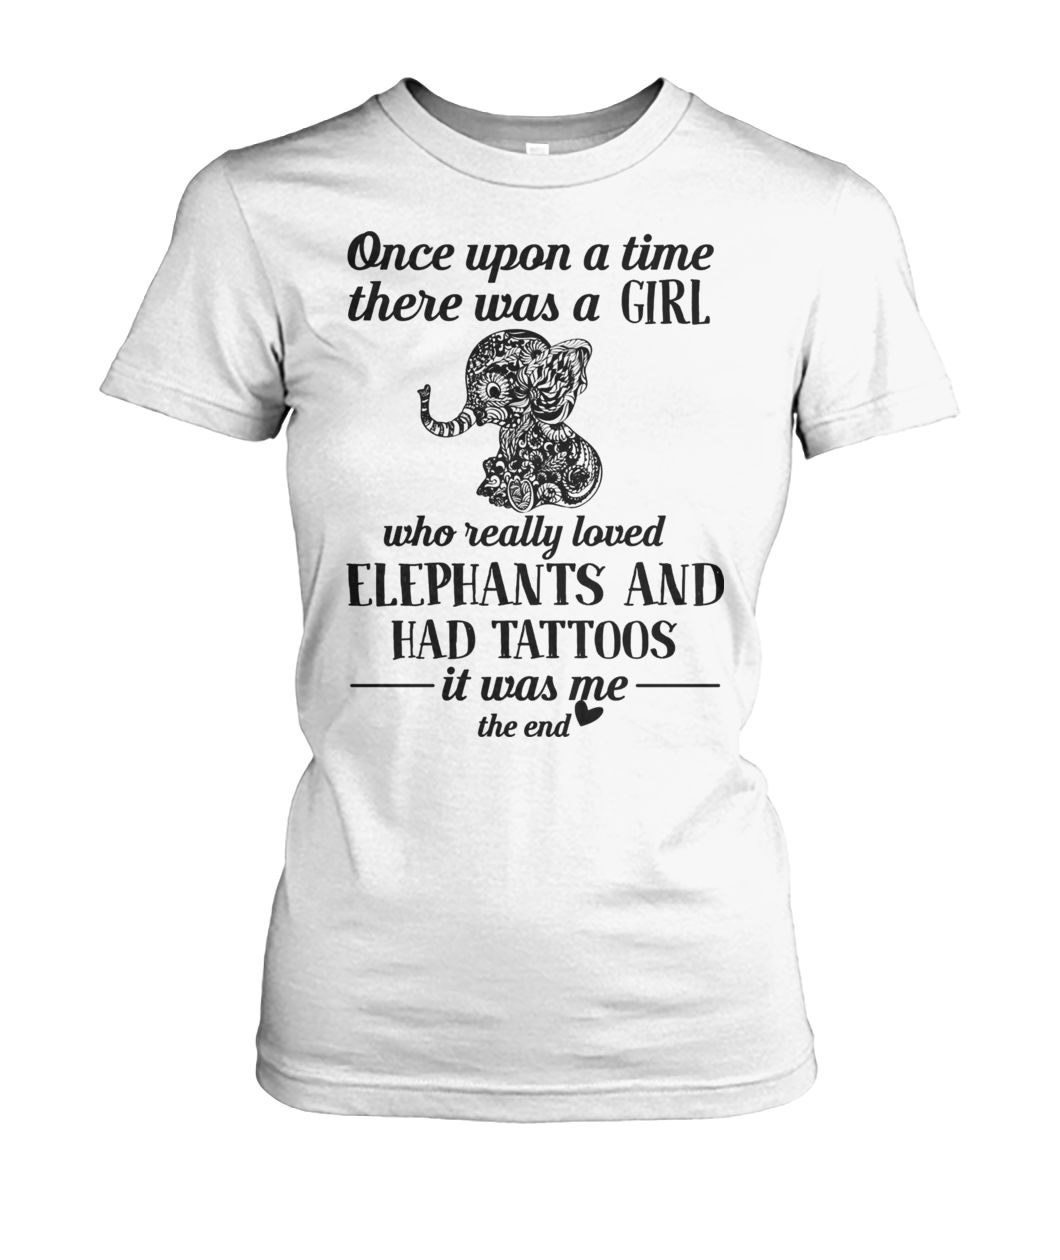 Once upon a time there was a girl who really loves elephants and has tattoos women's crew tee